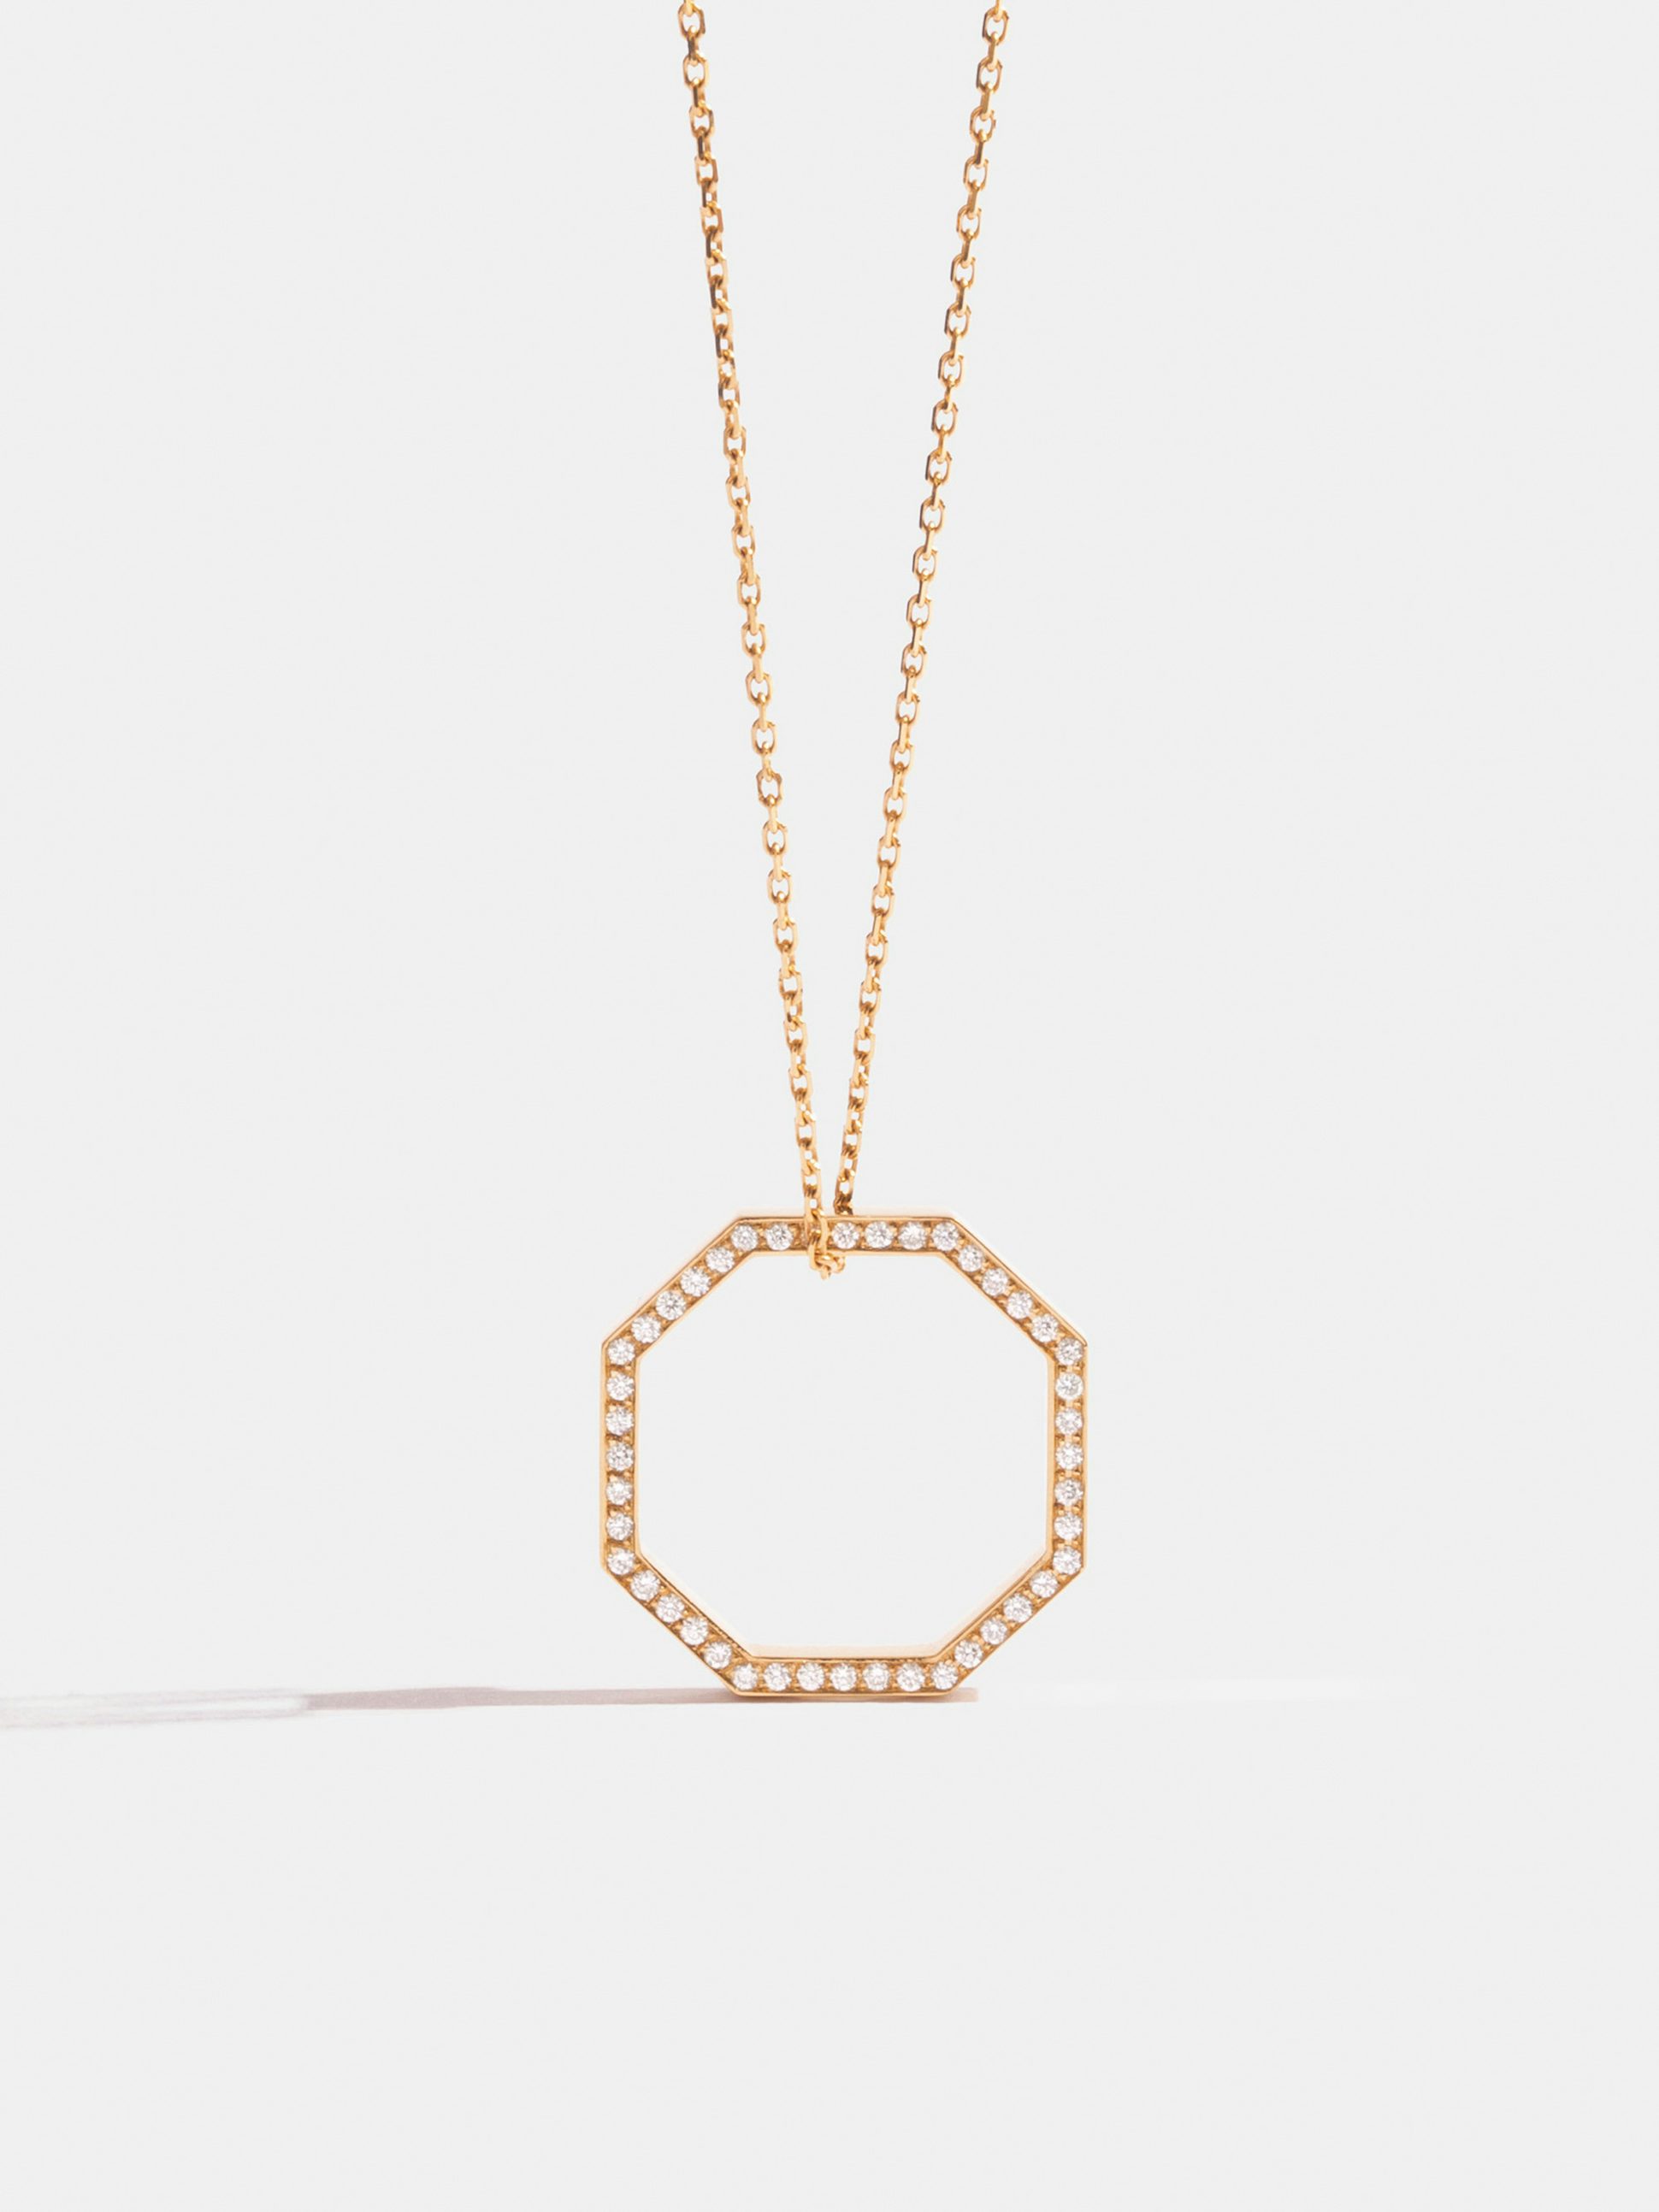 Octogone necklace with a 18mm pendant in 18k Fairmined ethical yellow gold, paved with lab-grown diamonds, on a 88cm chain.